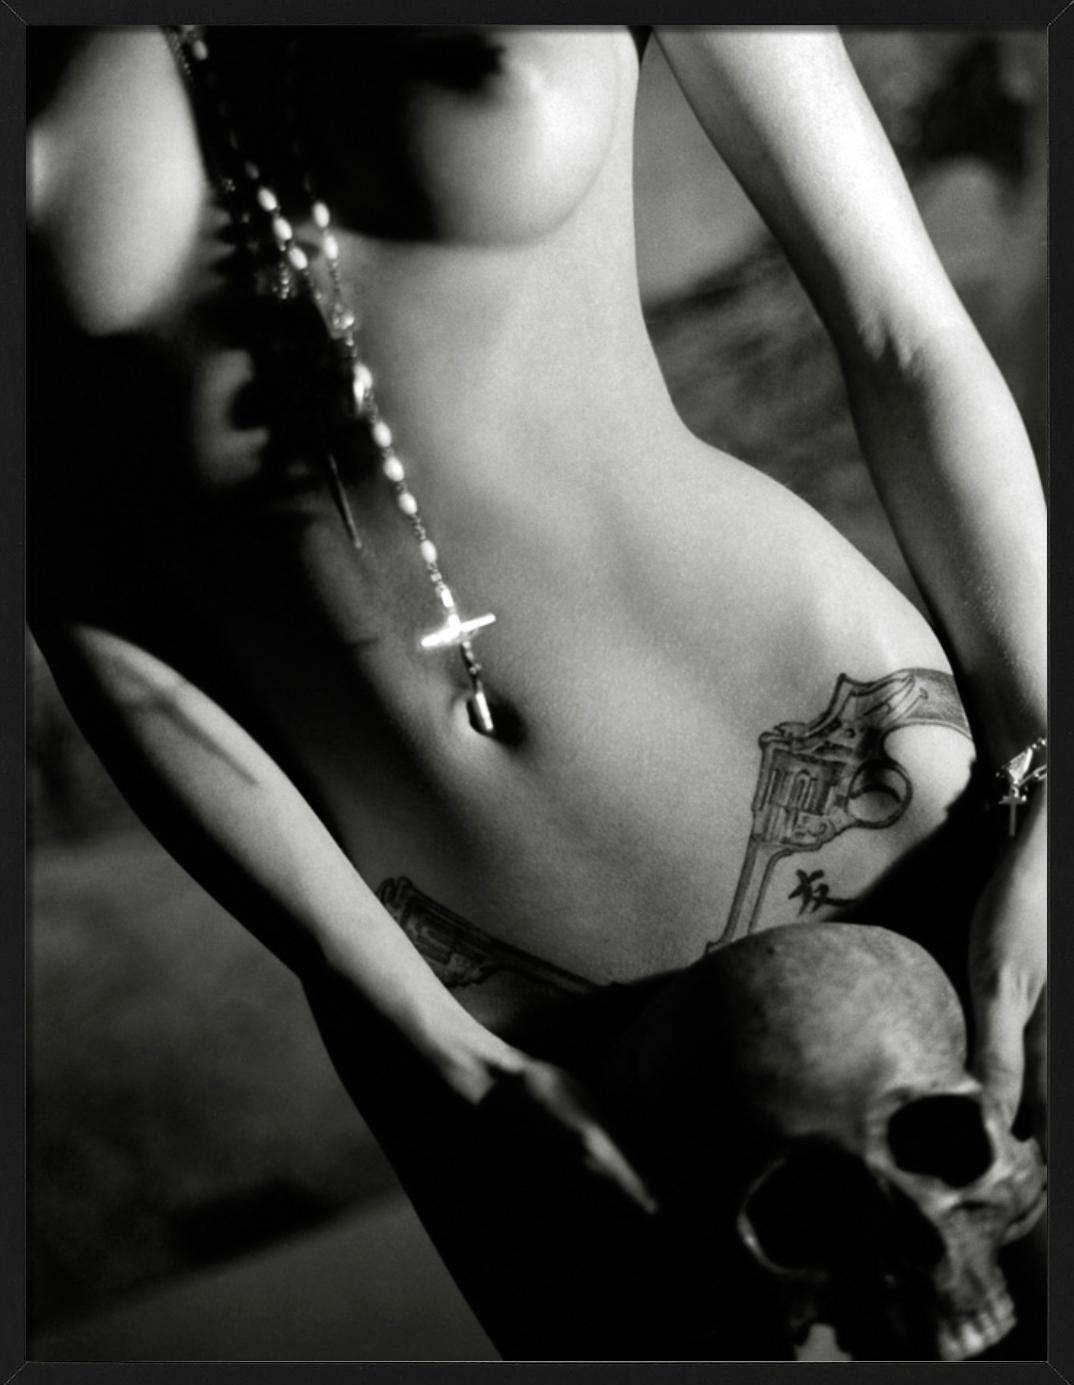 Mandy with Skull - closeup nude with skull and rosary, fine art photography 2007 For Sale 2